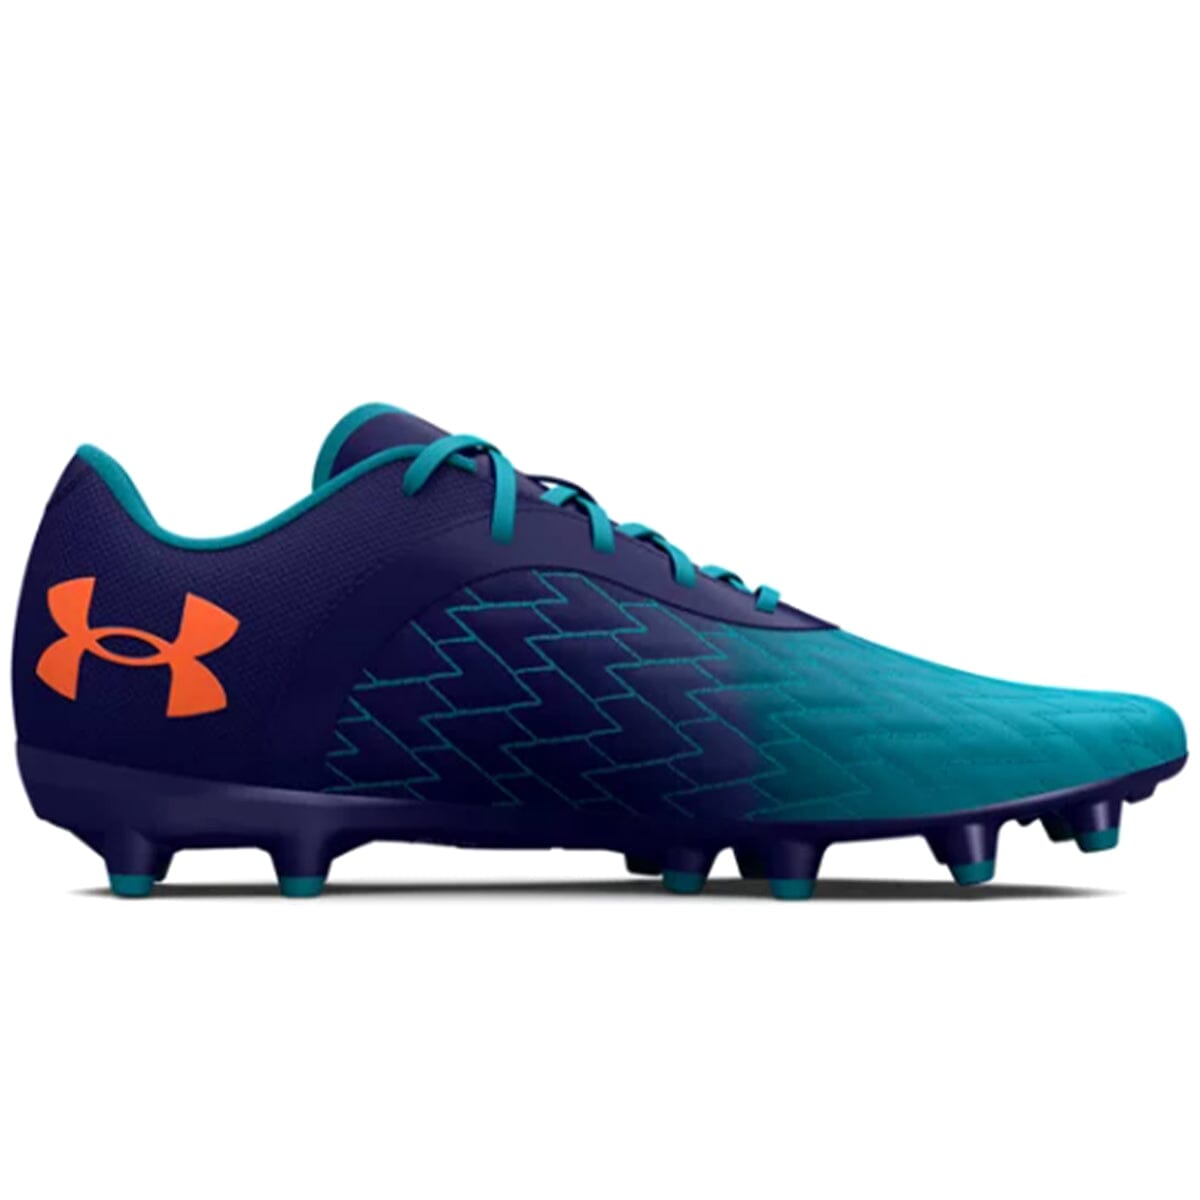 Under Armour Youth Magnetico Select 2.0 FG Soccer Cleats | 3025644-400 Cleats Under Armour 1 Glacier Blue / Sonar Blue 